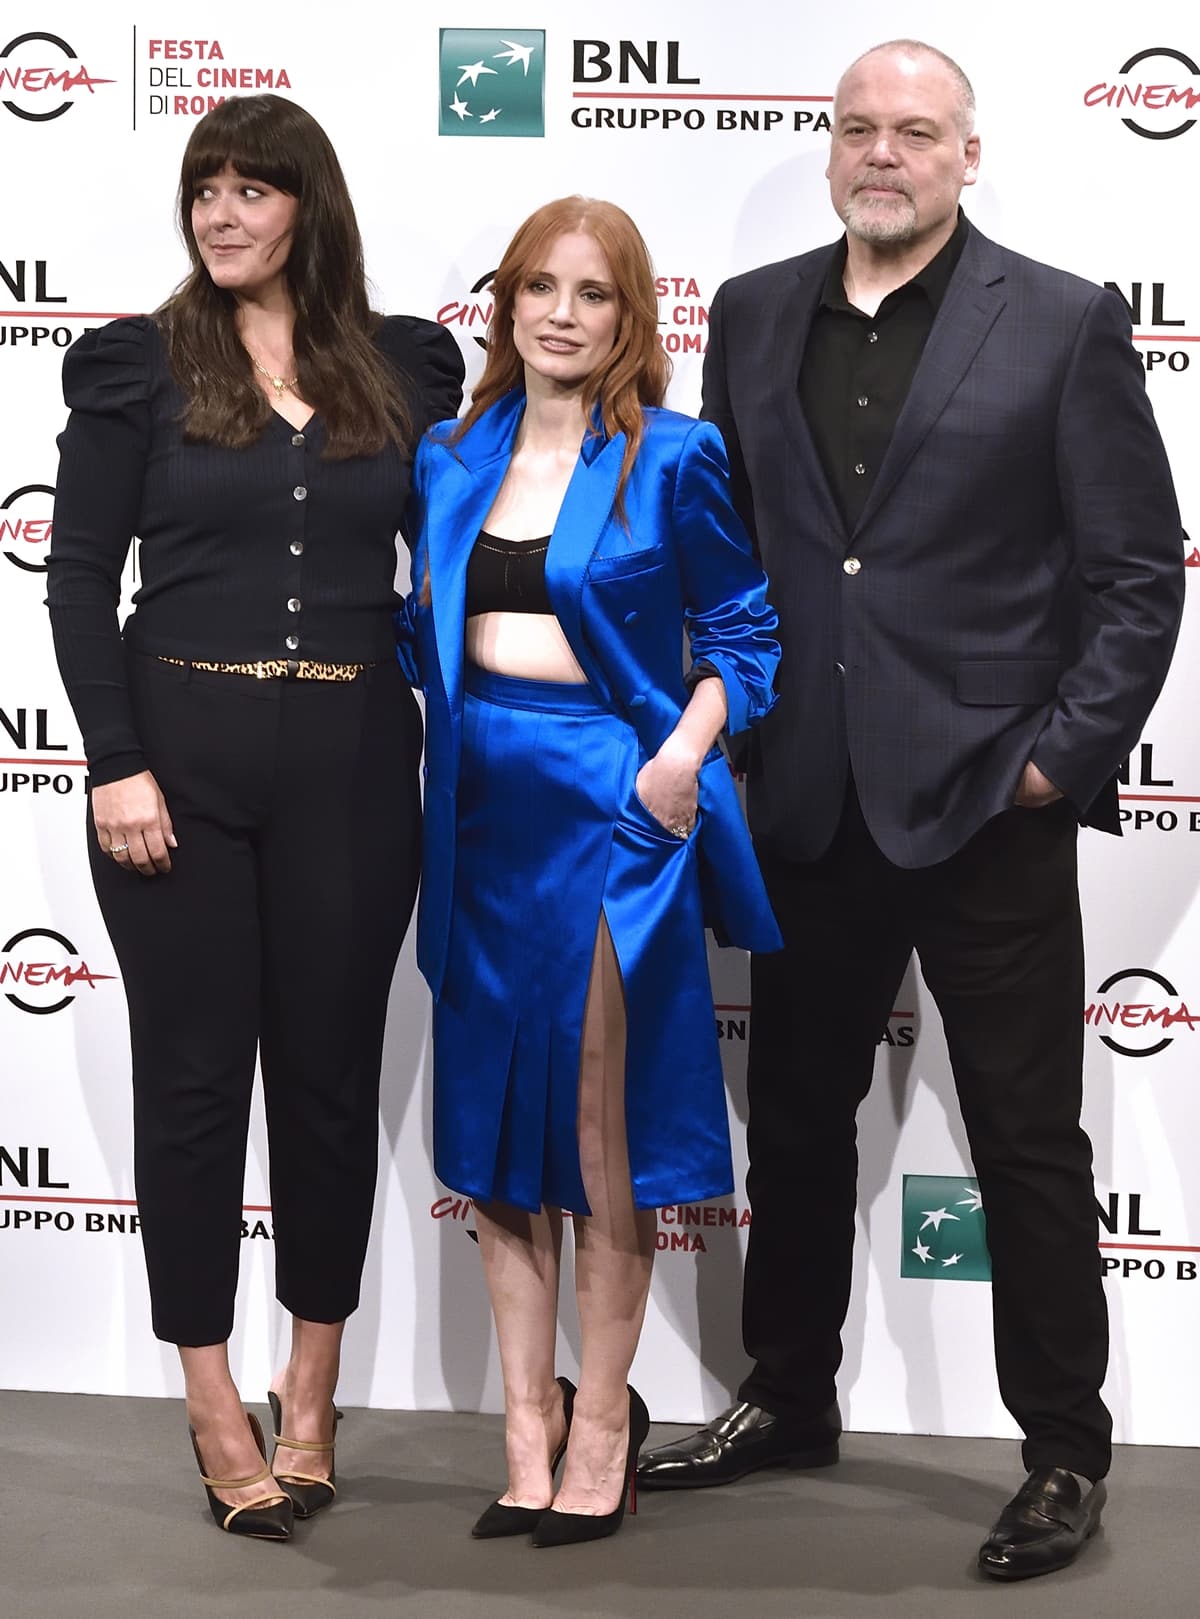 Film producer Kelly Carmichael, American actress Jessica Chastain and American actor, director, and film producer Vincent D'Onofrio at Rome Film Fest 2021